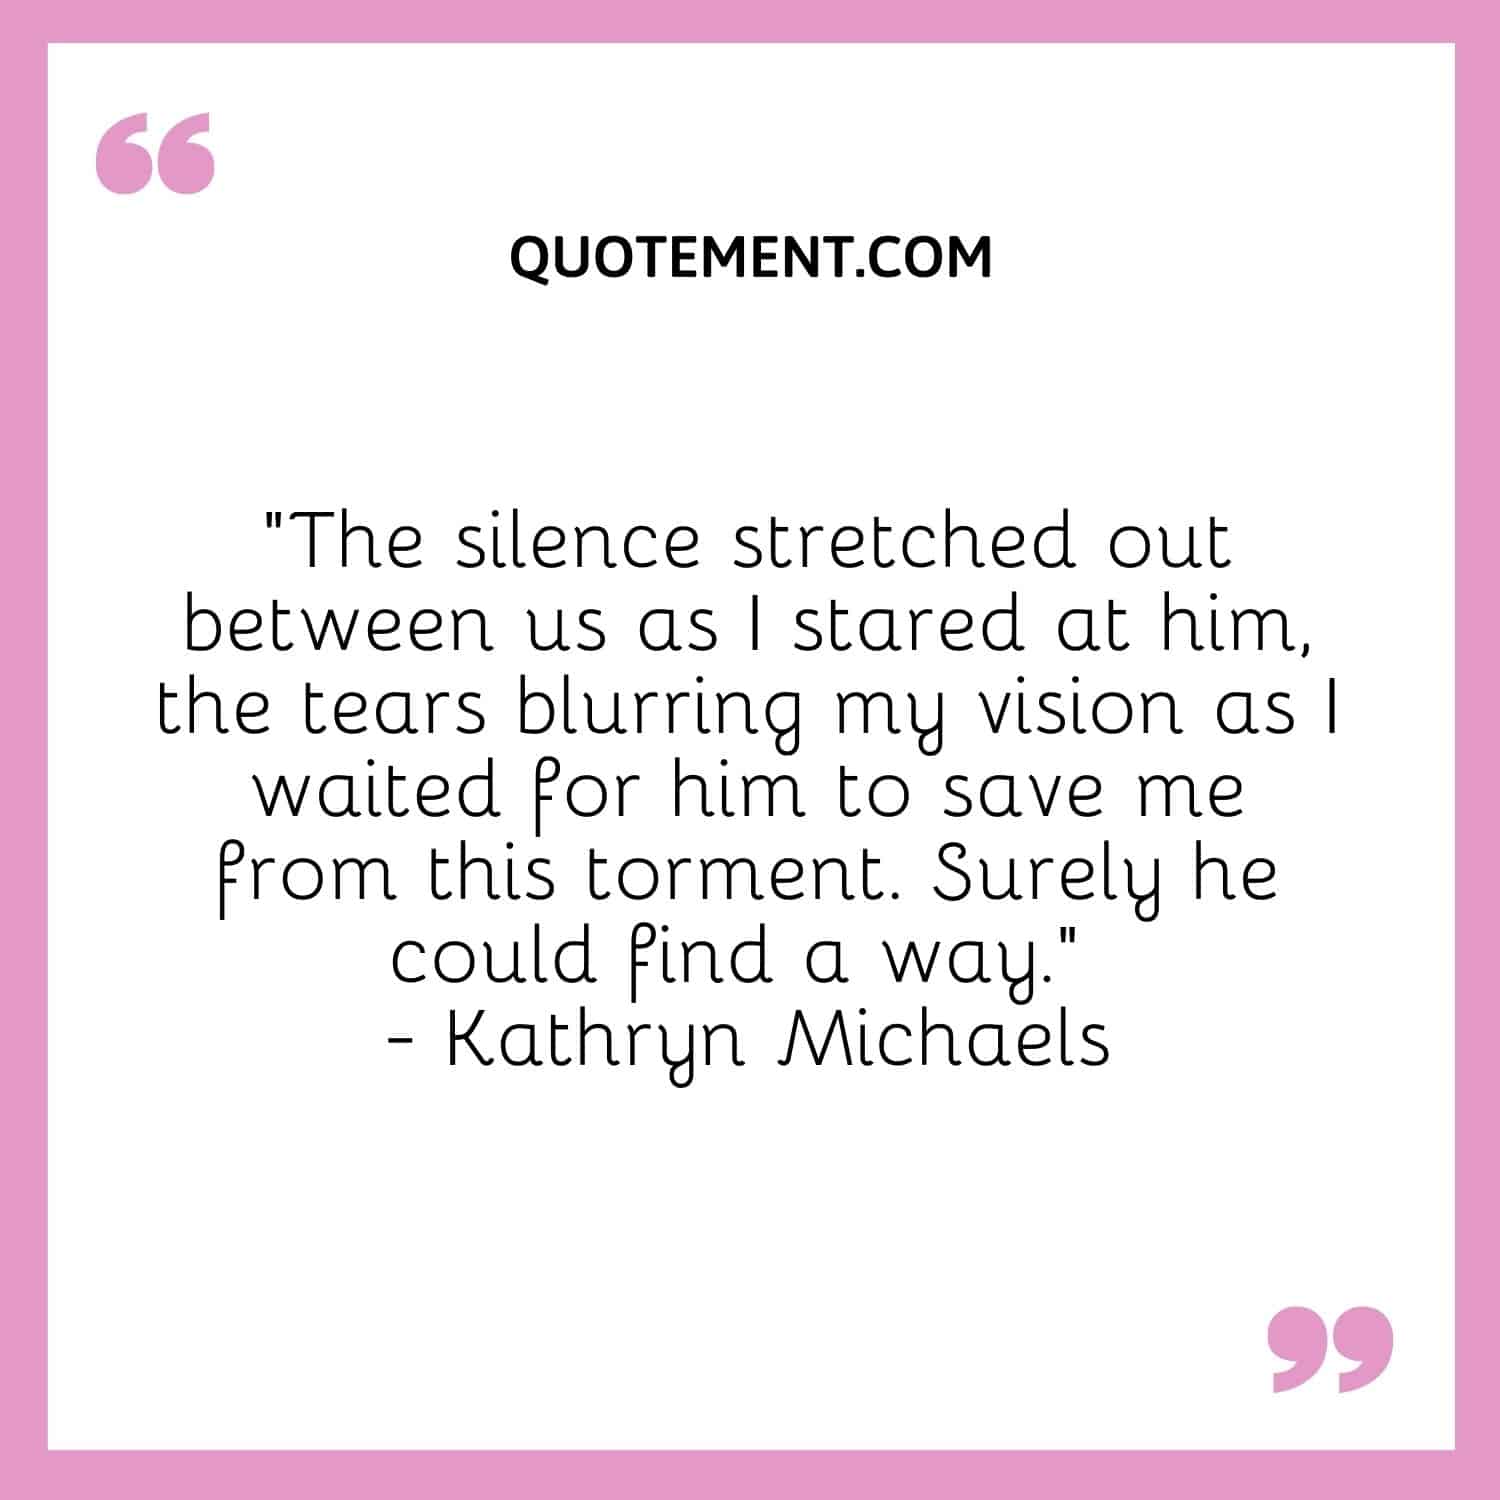 “The silence stretched out between us as I stared at him, the tears blurring my vision as I waited for him to save me from this torment. Surely he could find a way.” — Kathryn Michaels